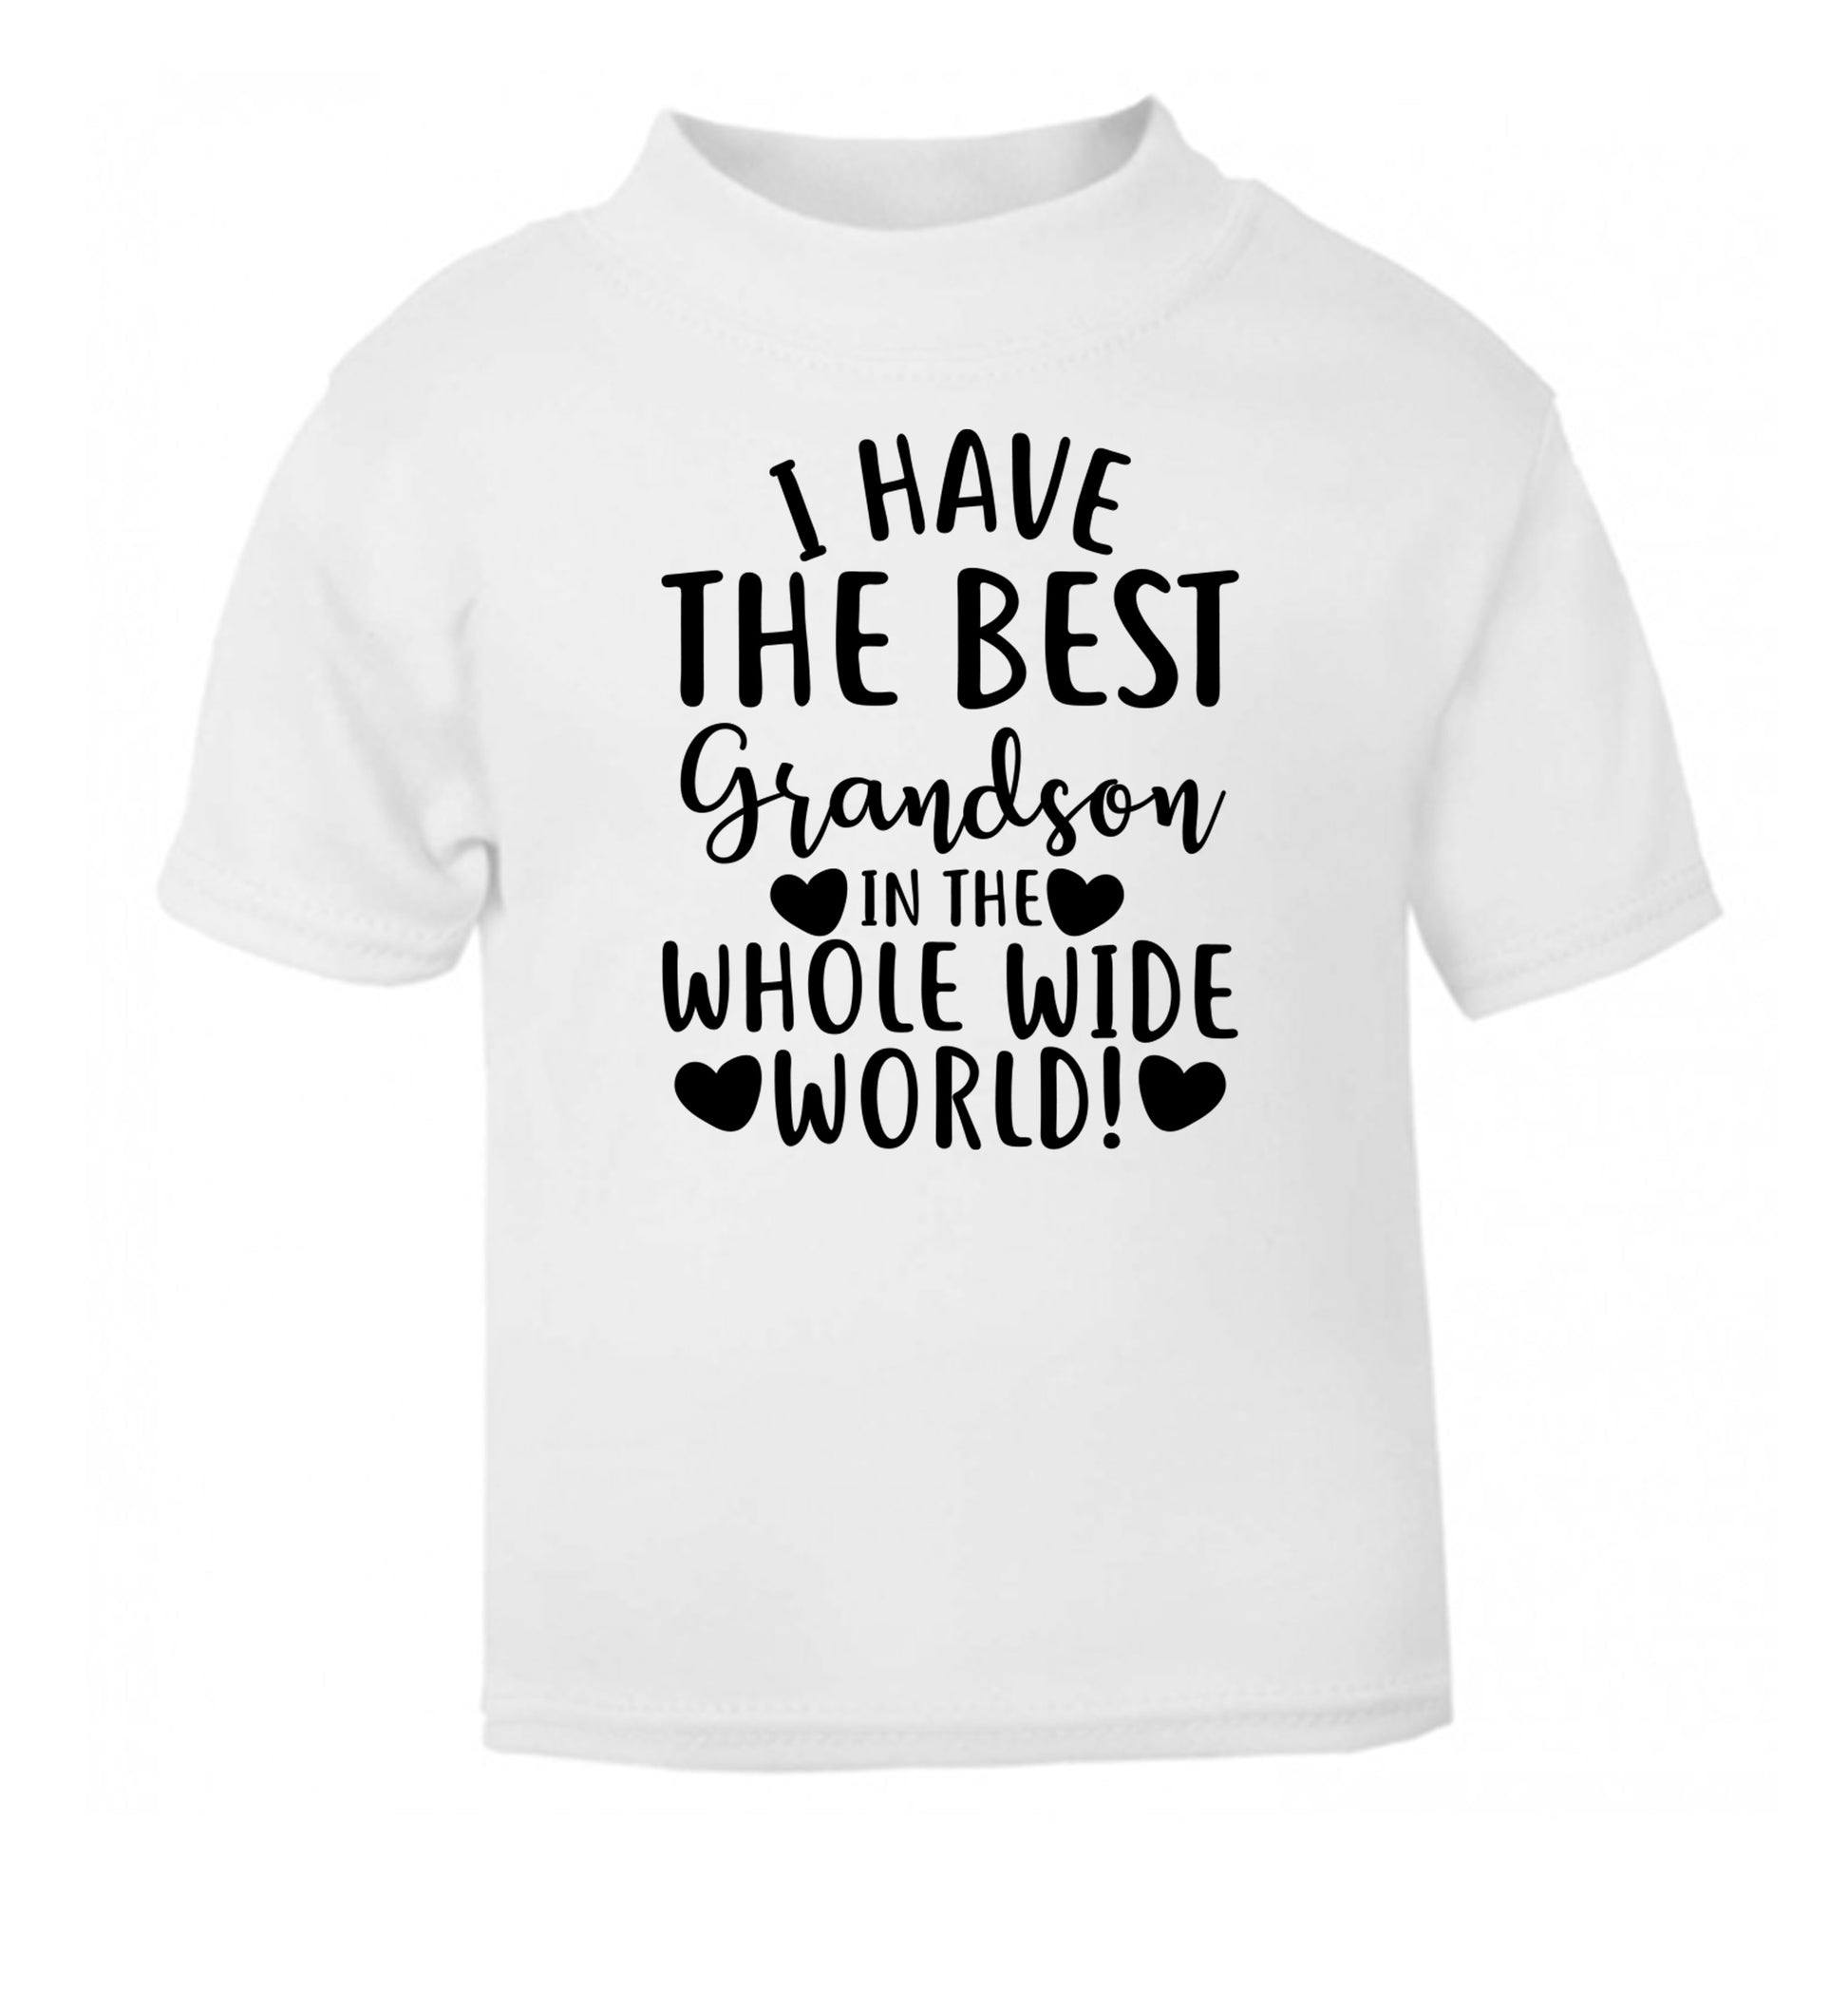 I have the best grandson in the whole wide world! white Baby Toddler Tshirt 2 Years